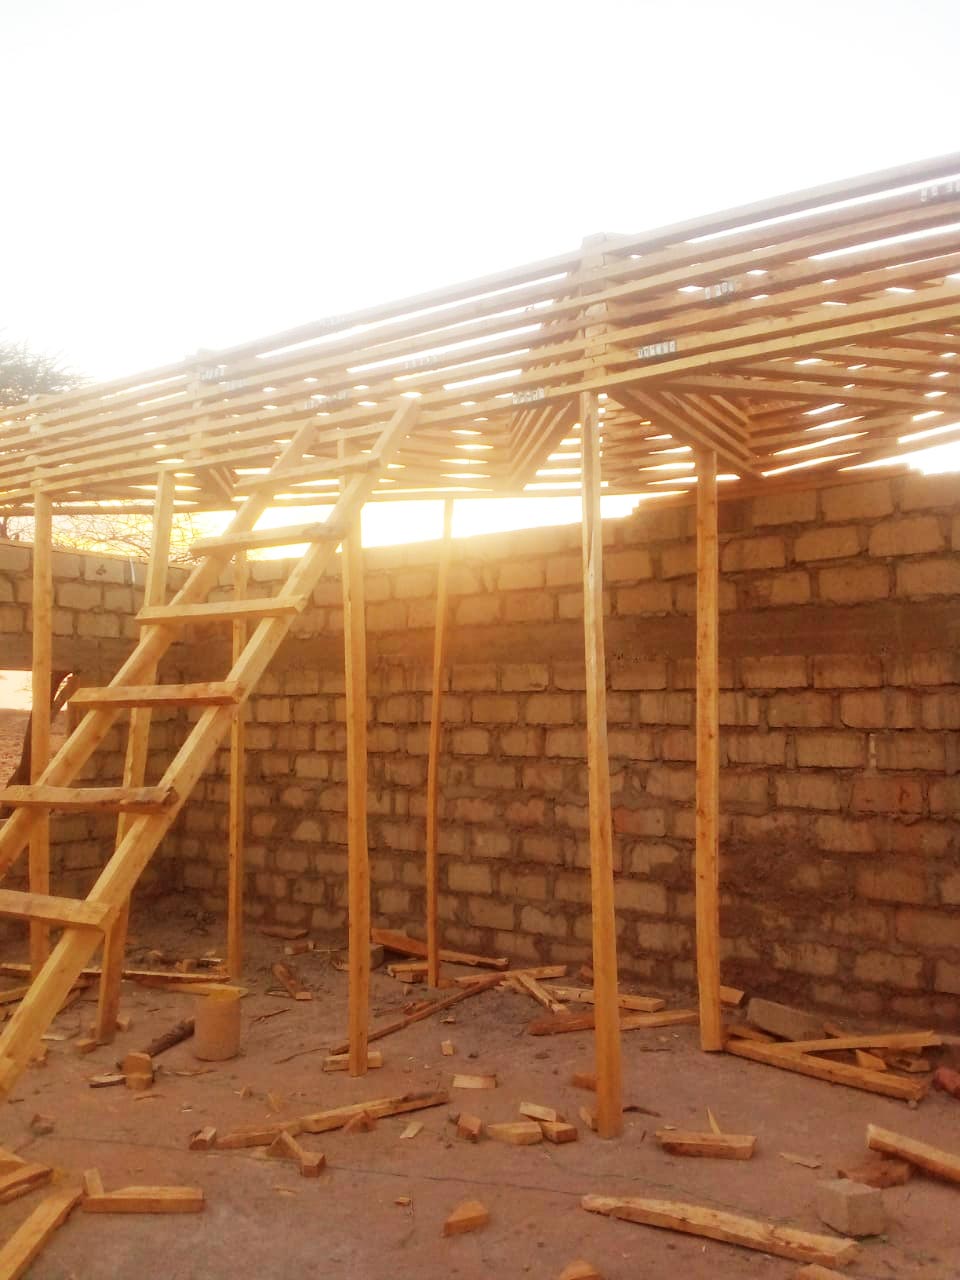 The construction of the roof structure.